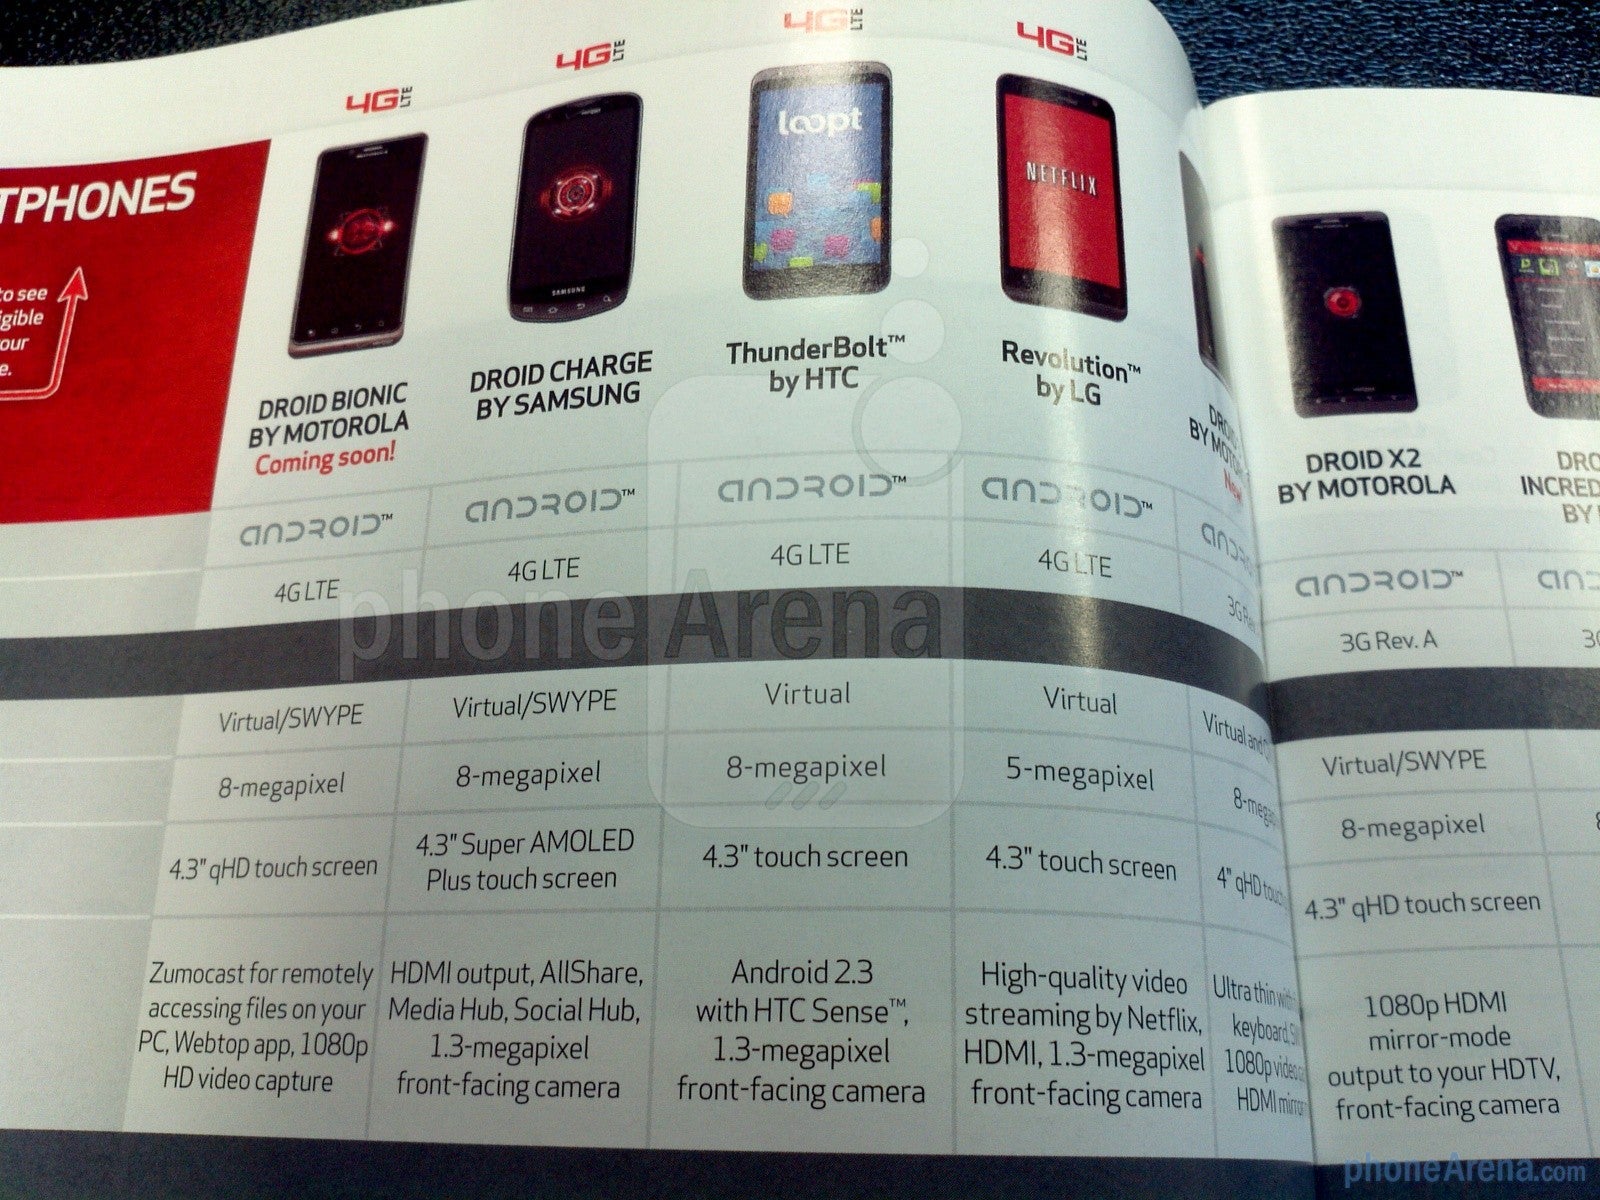 Verizon brochure mentions the HTC ThunderBolt packing Android 2.3 Gingerbread - arrival imminent?